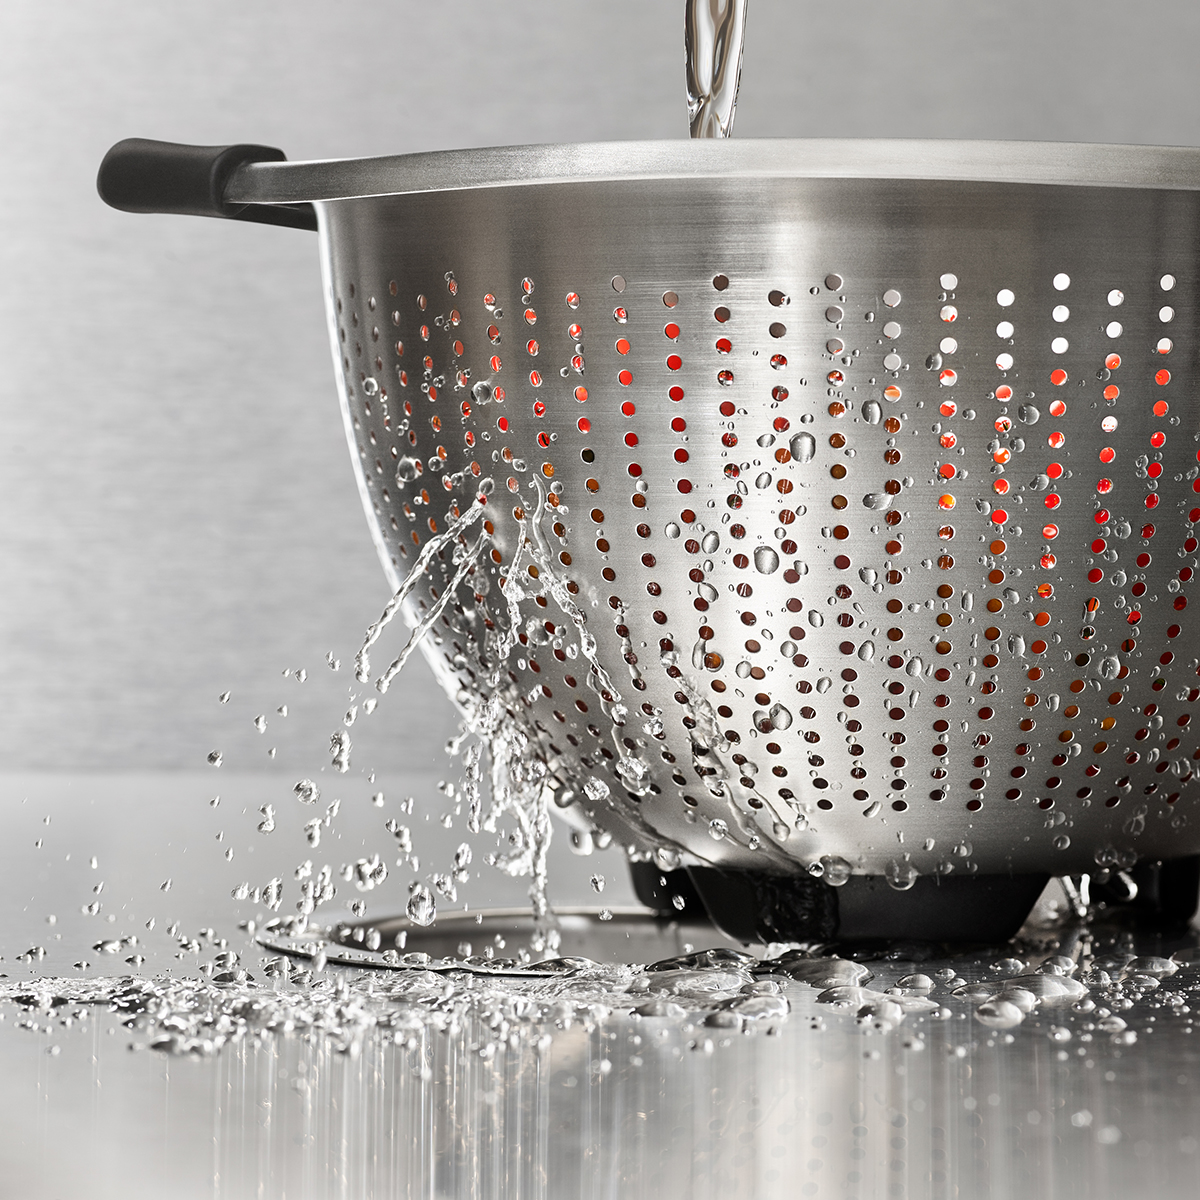 OXO 5 Qt. Stainless Steel Colander – Lovetocook